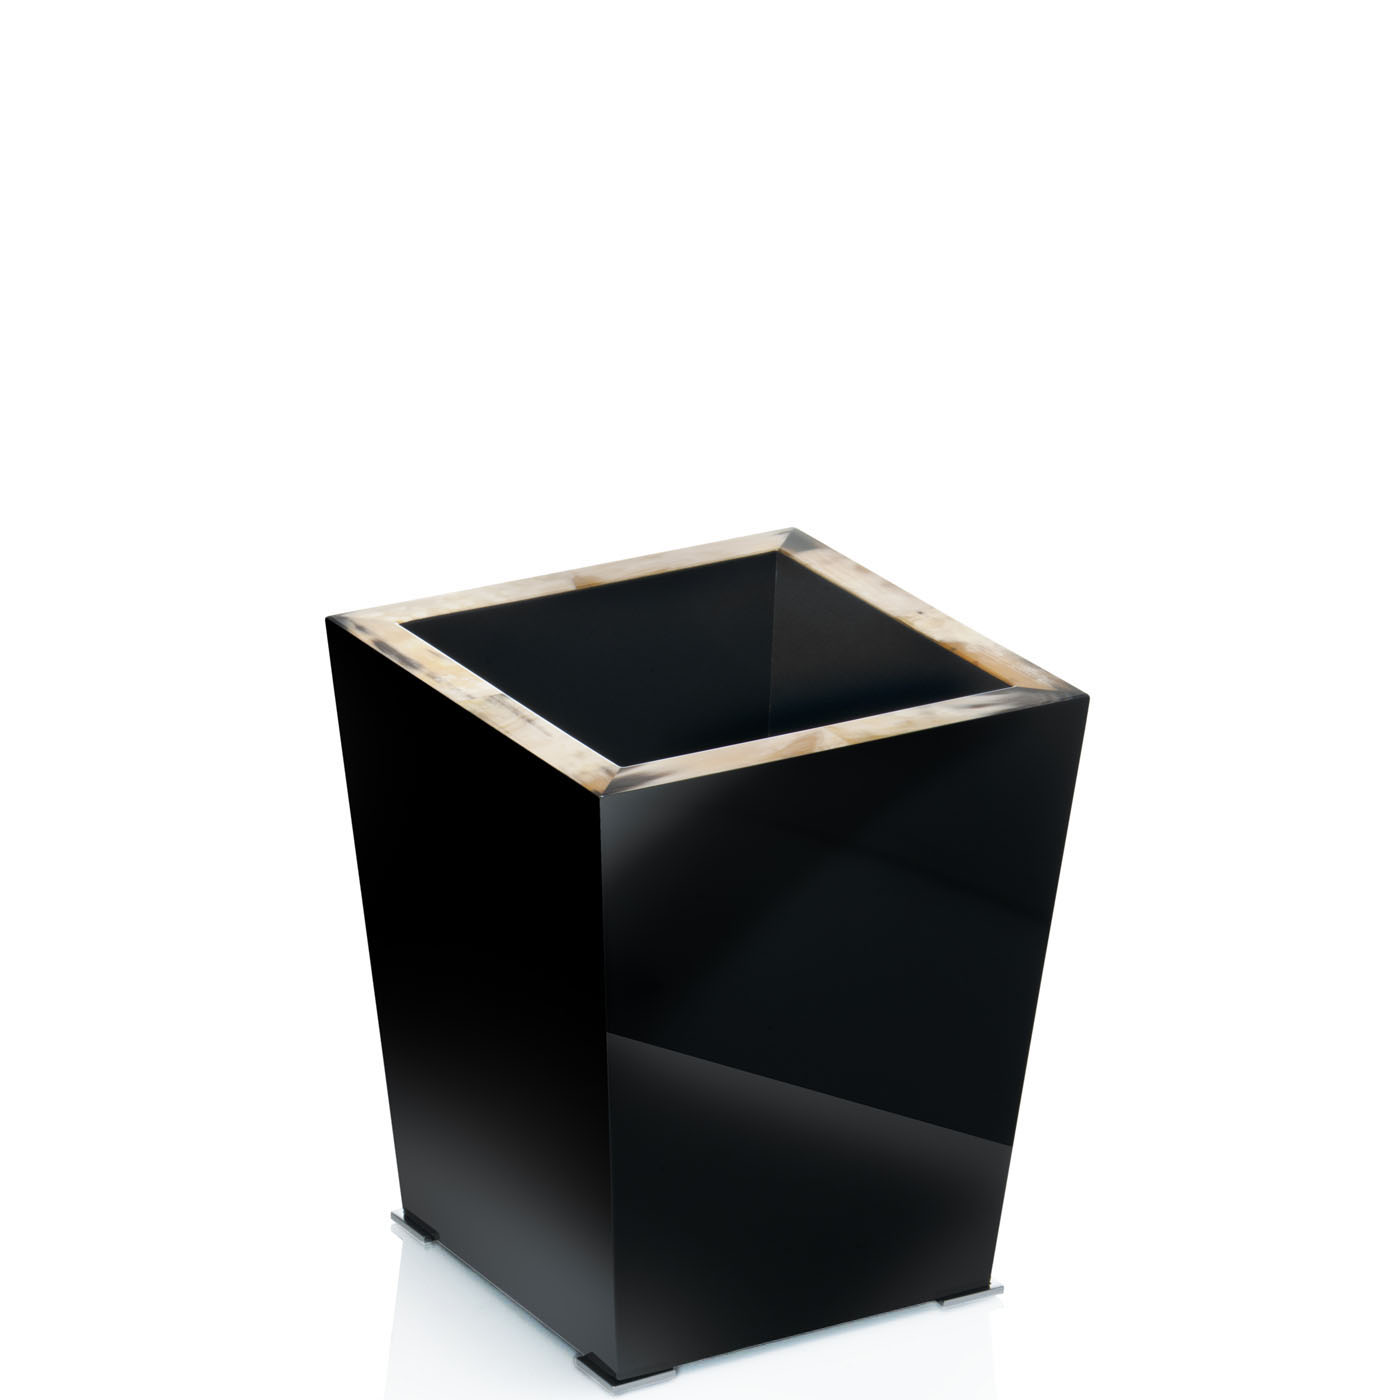 Bath sets - Fedro waste paper basket in horn and glossy black lacquered wood - Arcahorn